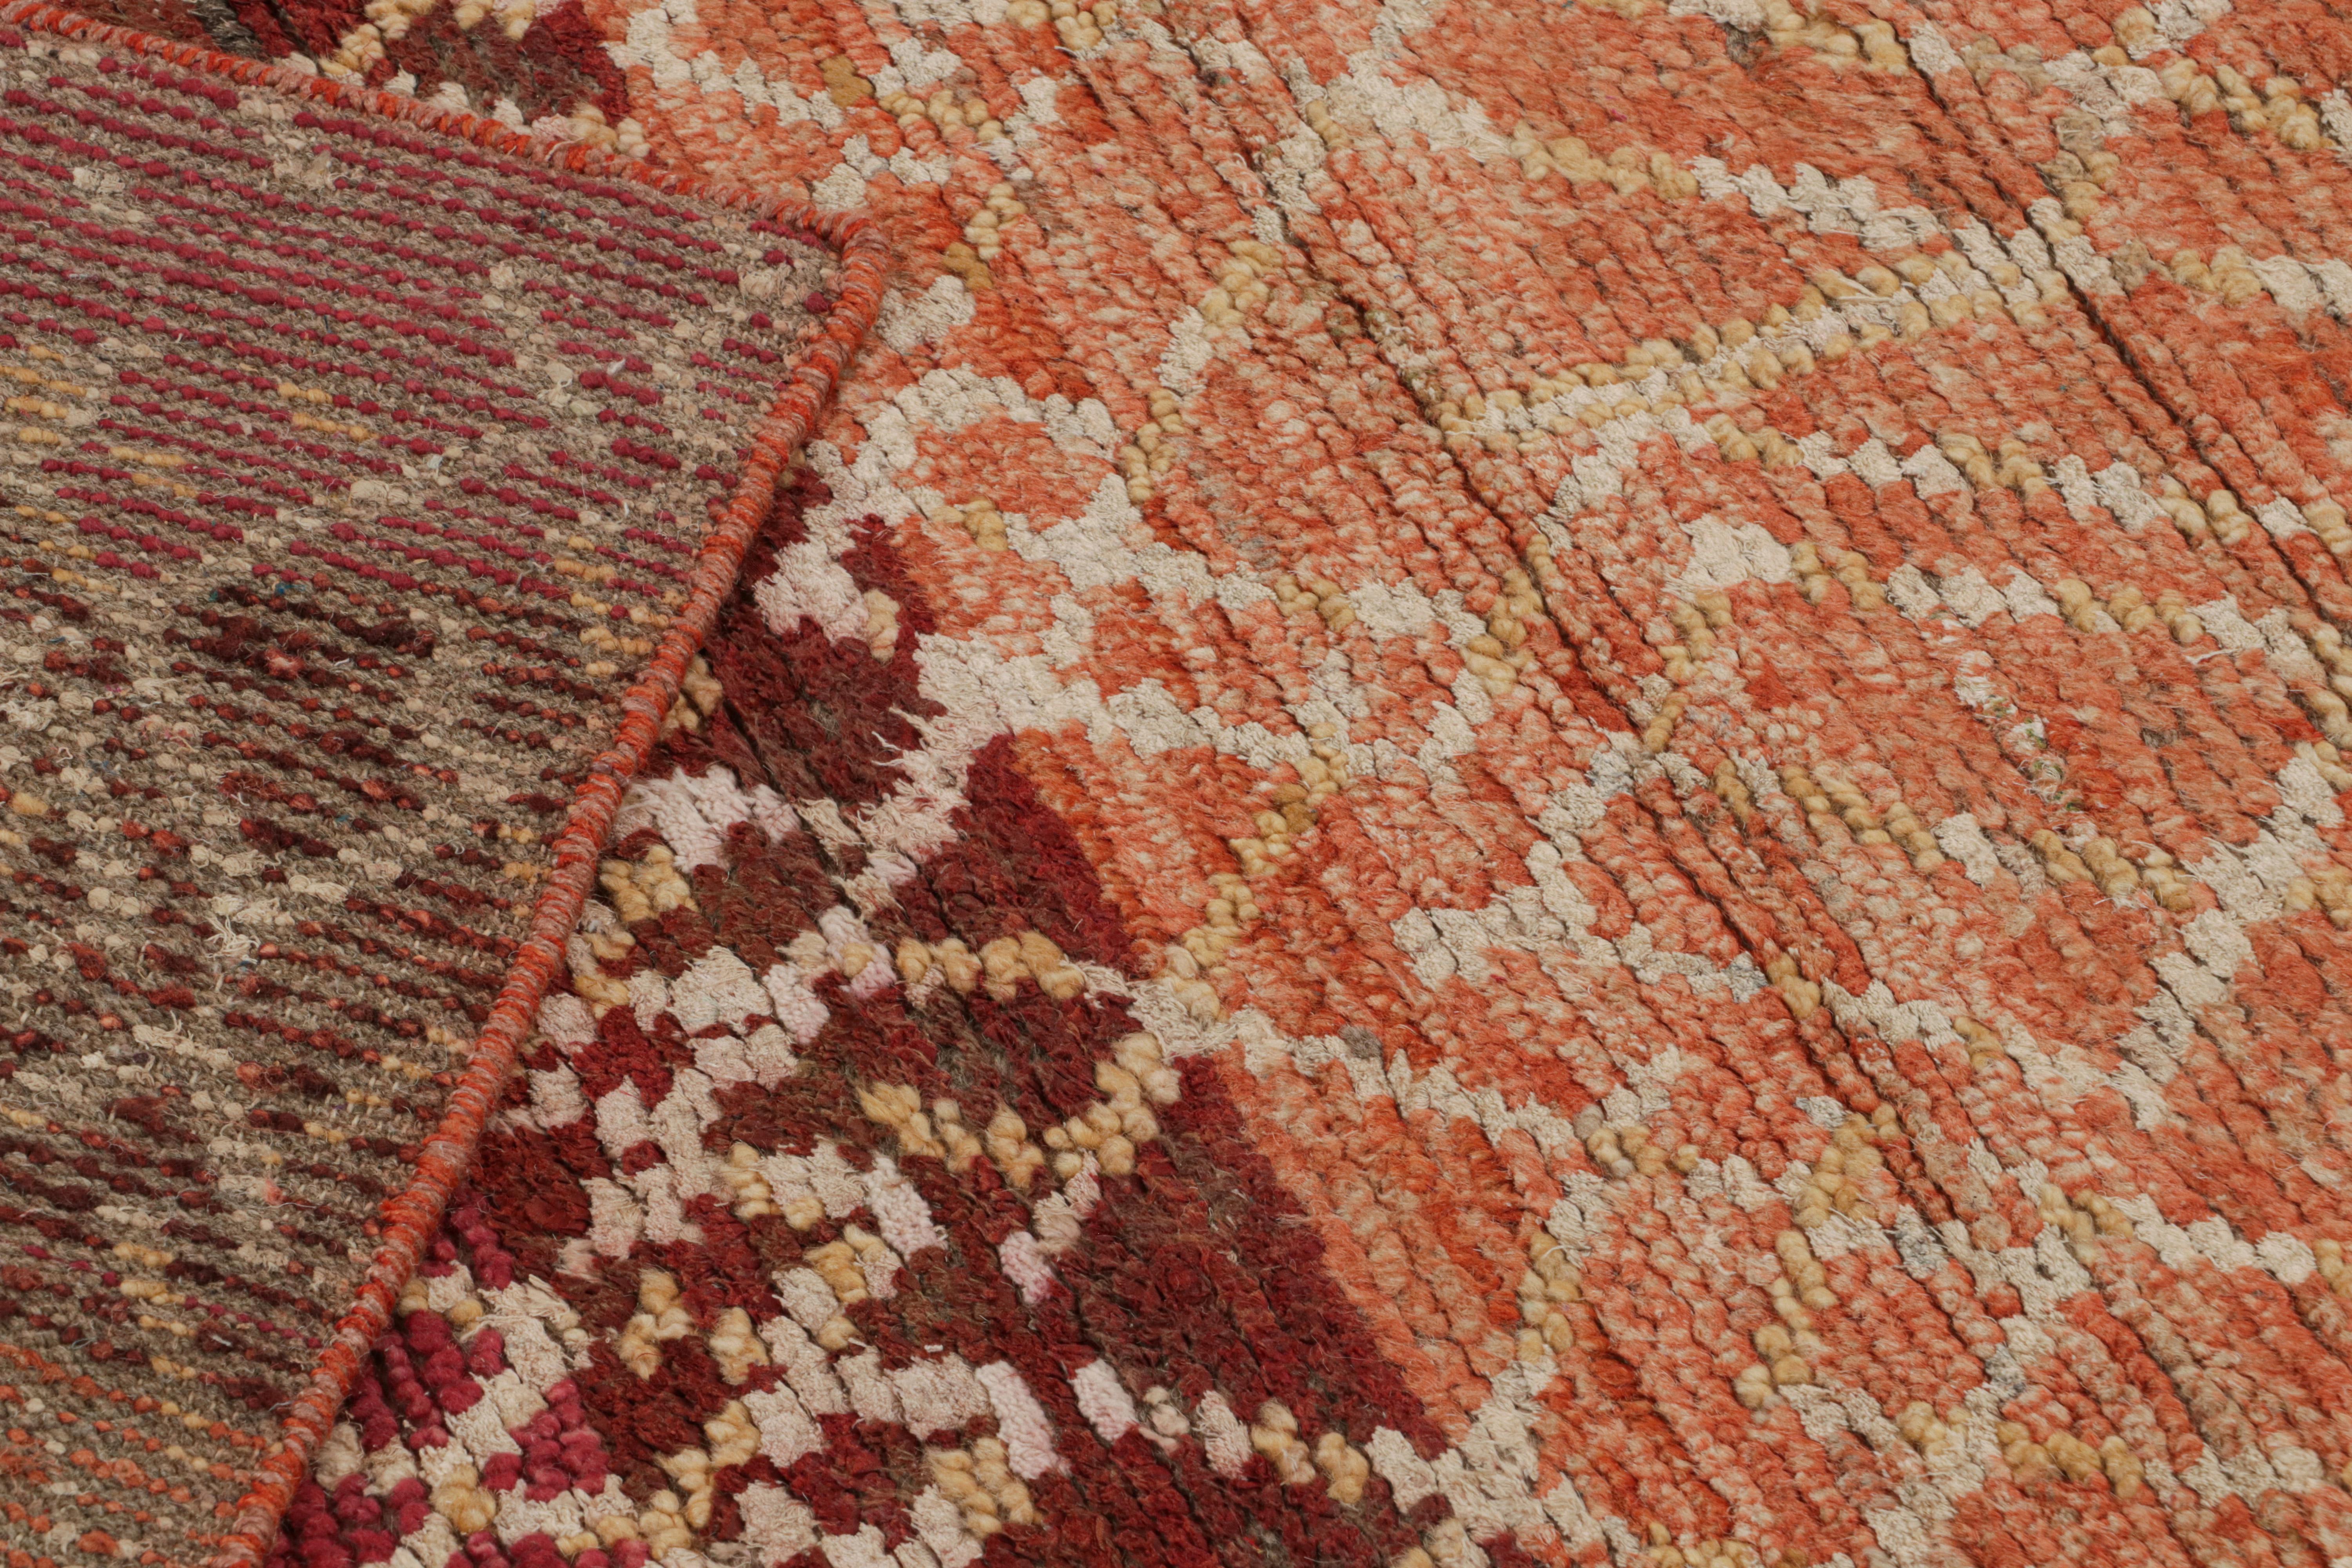 Rug & Kilim’s Moroccan Style Rug in Red, Orange & Beige-Brown Geometric Patterns In New Condition For Sale In Long Island City, NY